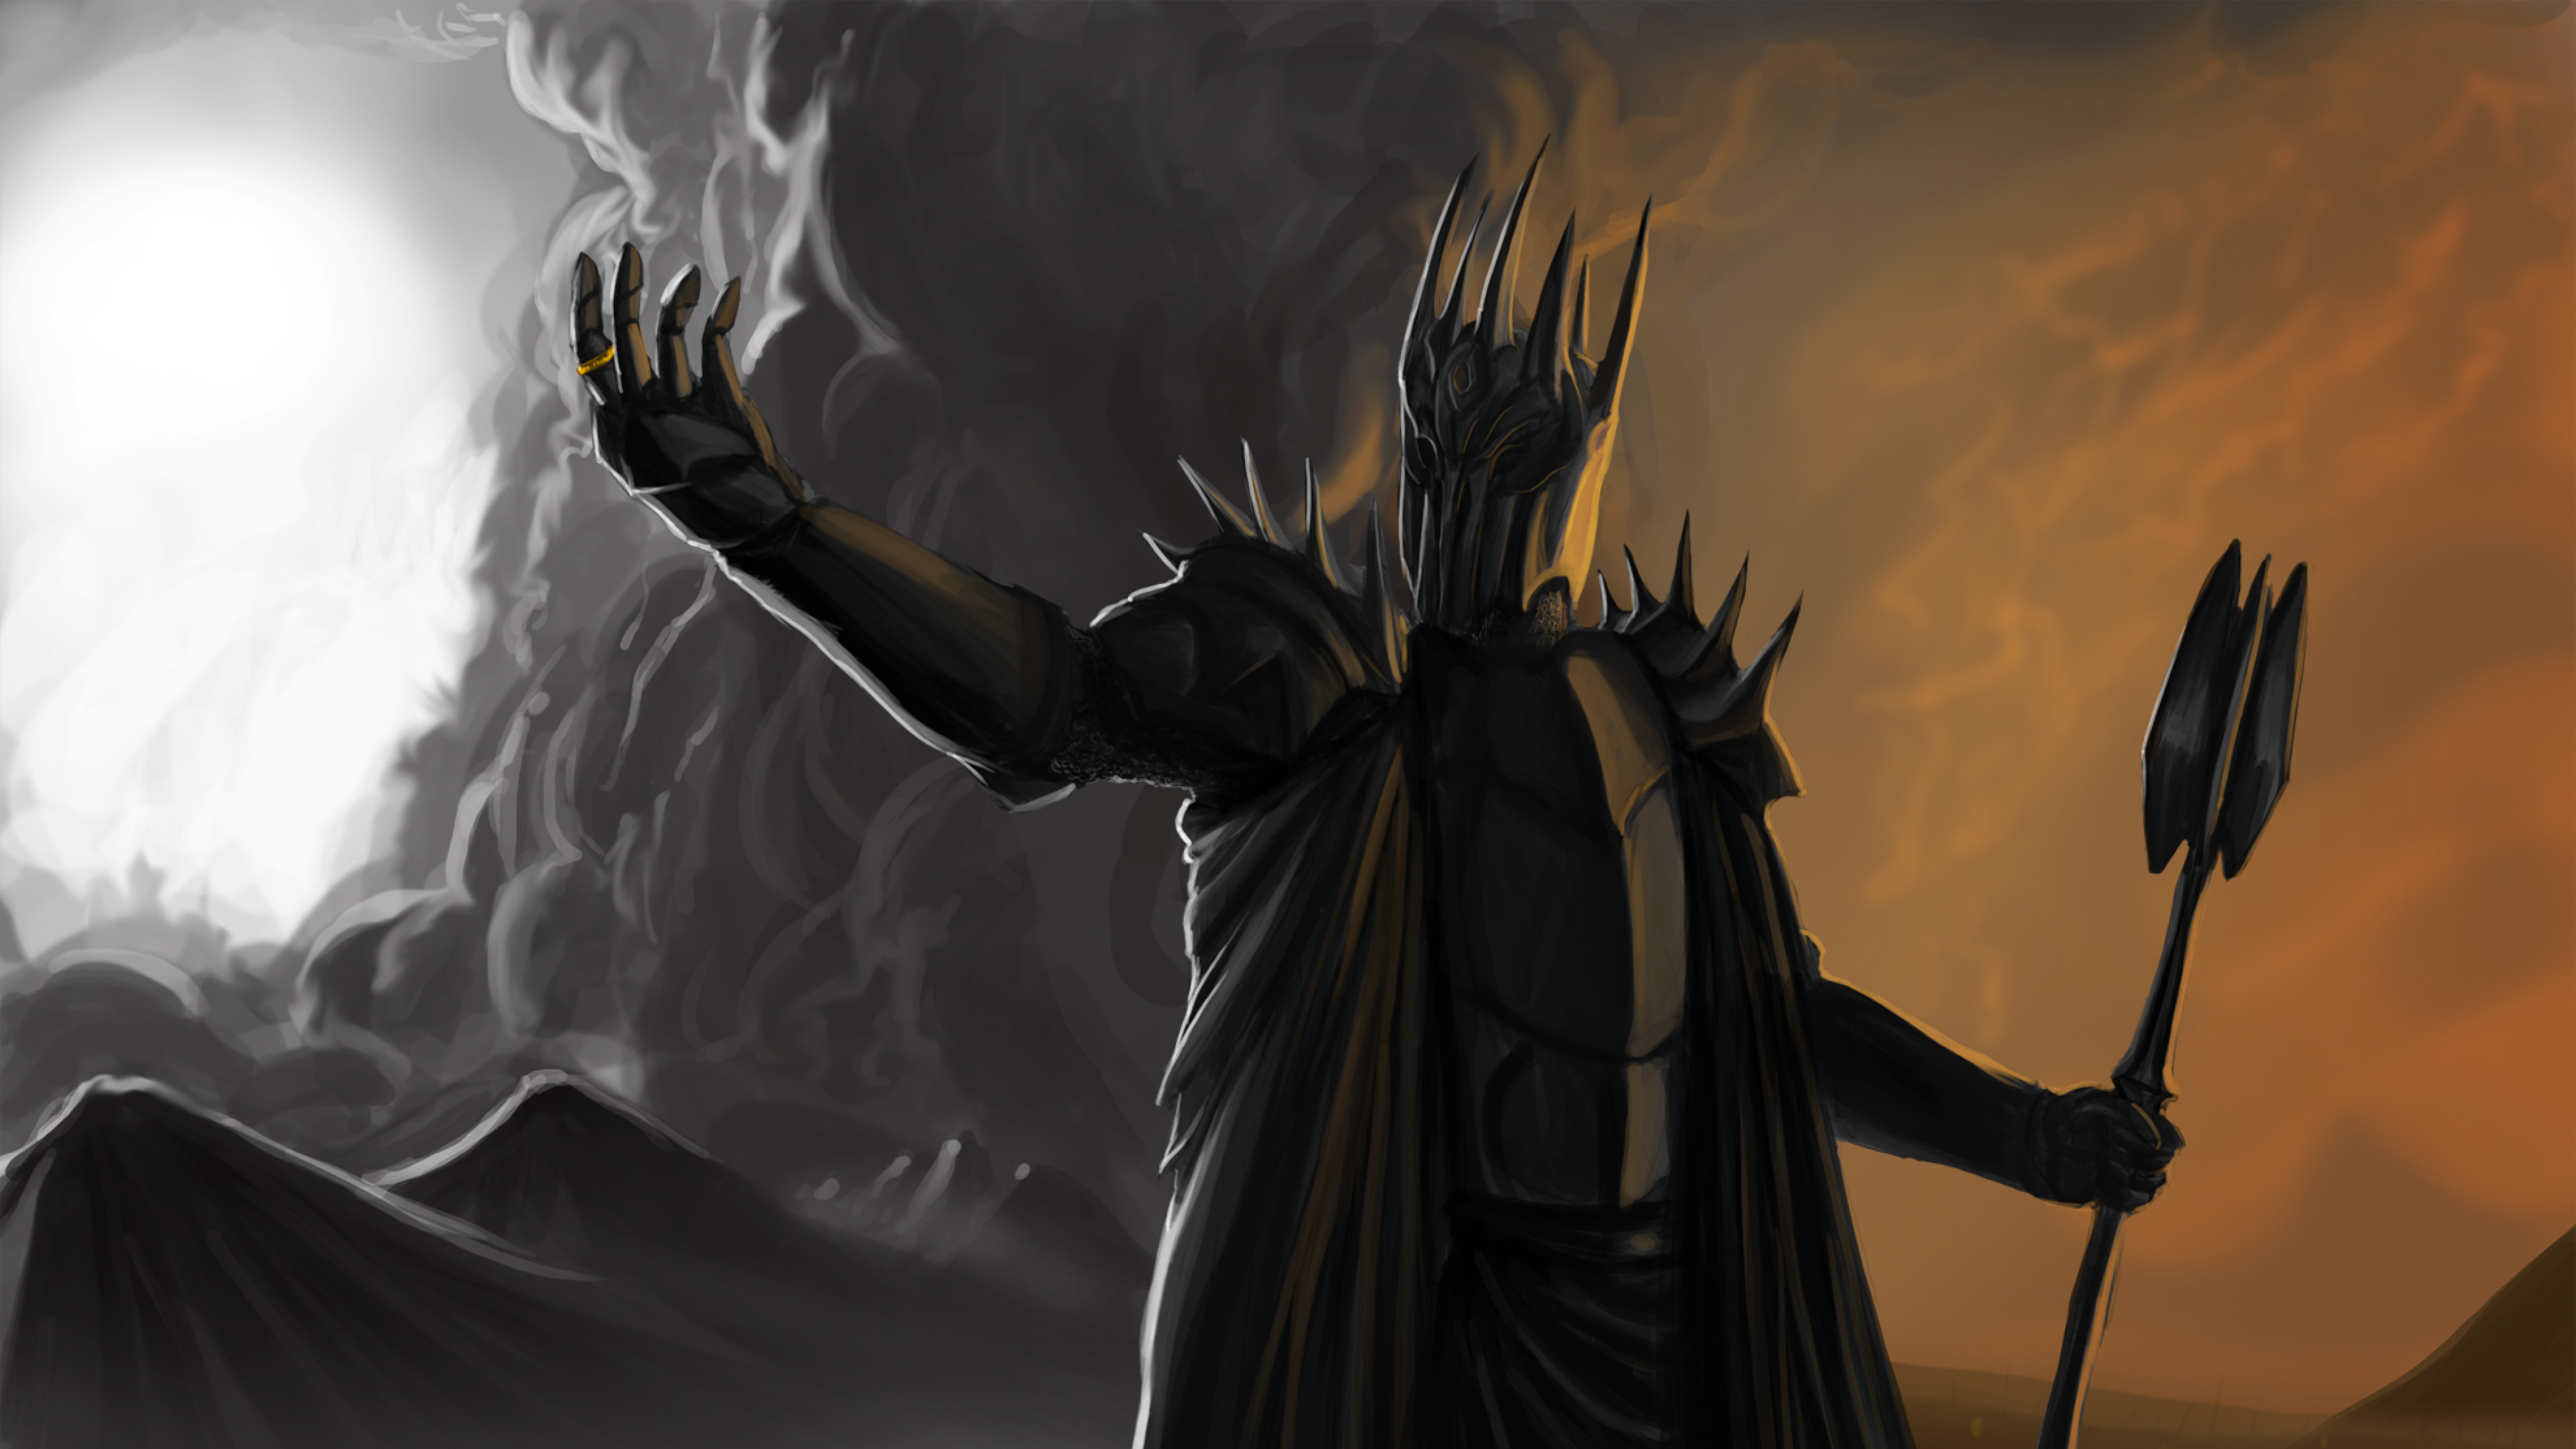 7680x4320 Sauron Lord Of The Rings 8K